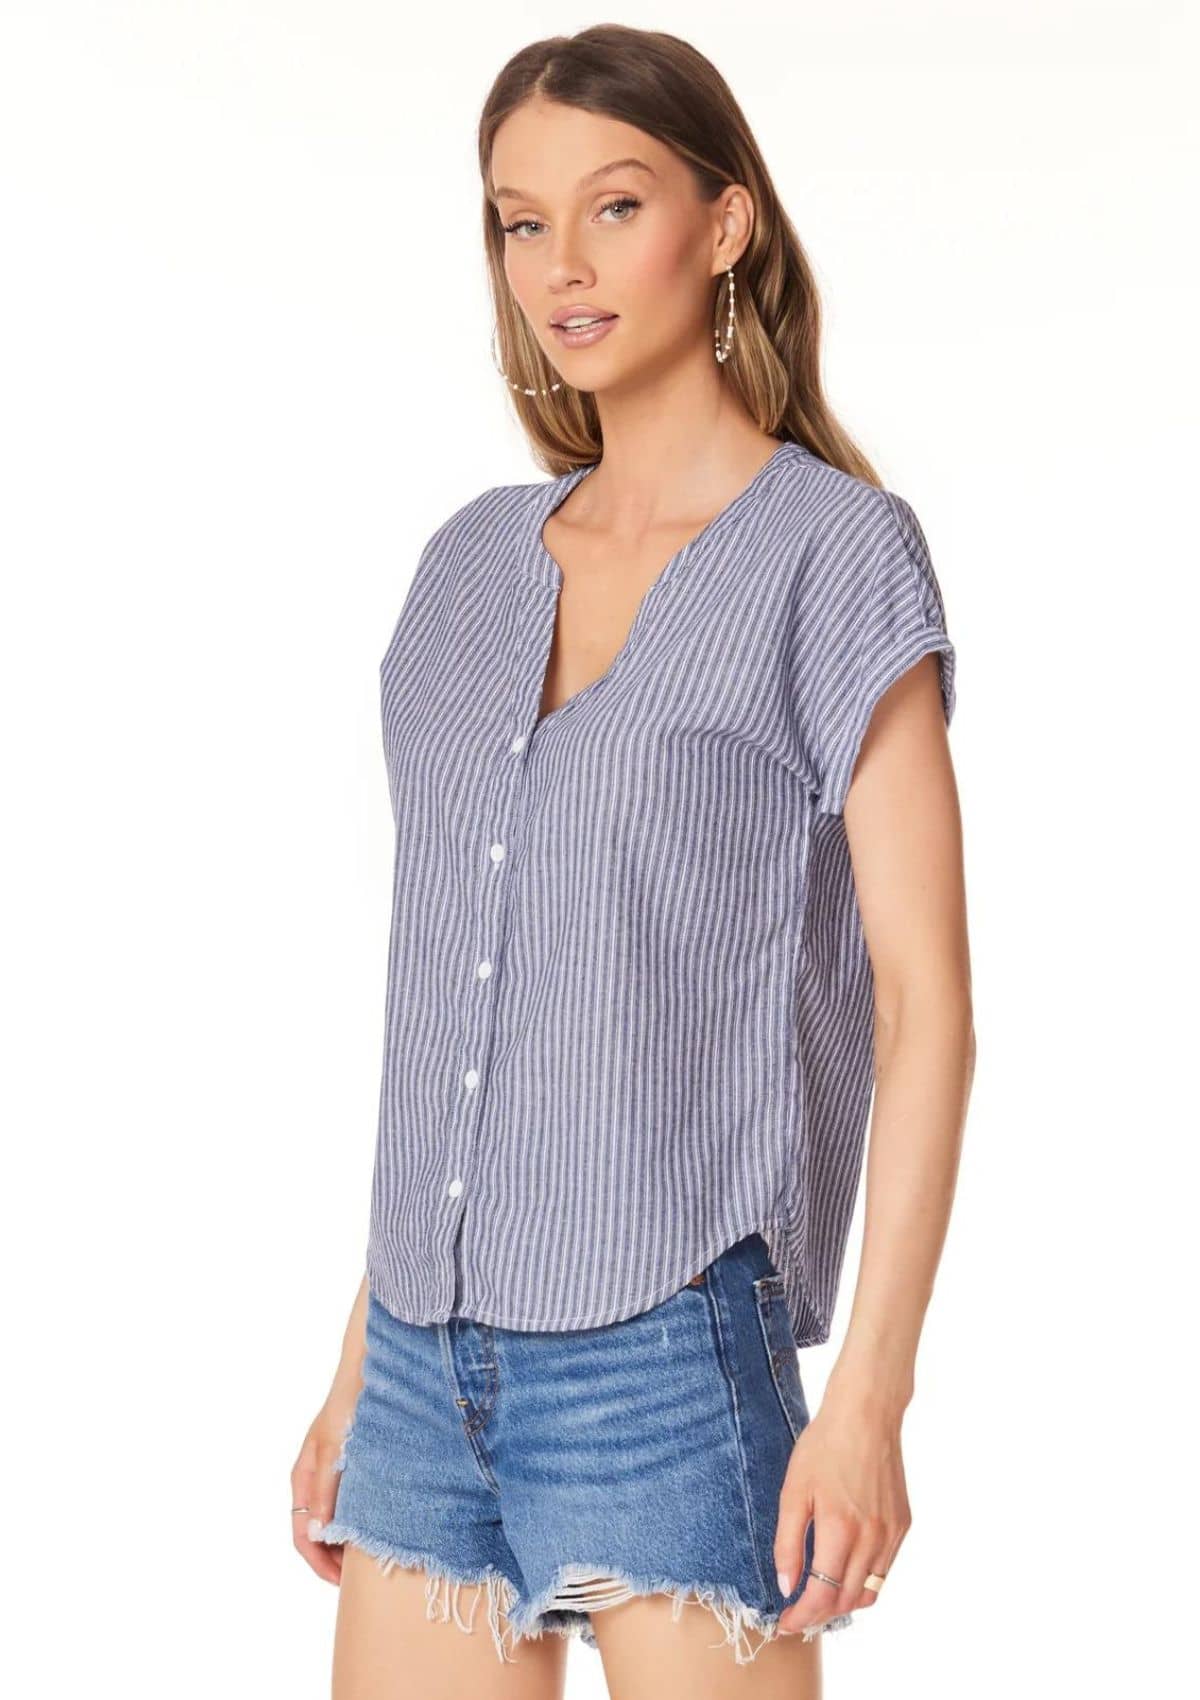 Blouses-Buttondown shirts-Casual Tops-Ruby Jane.